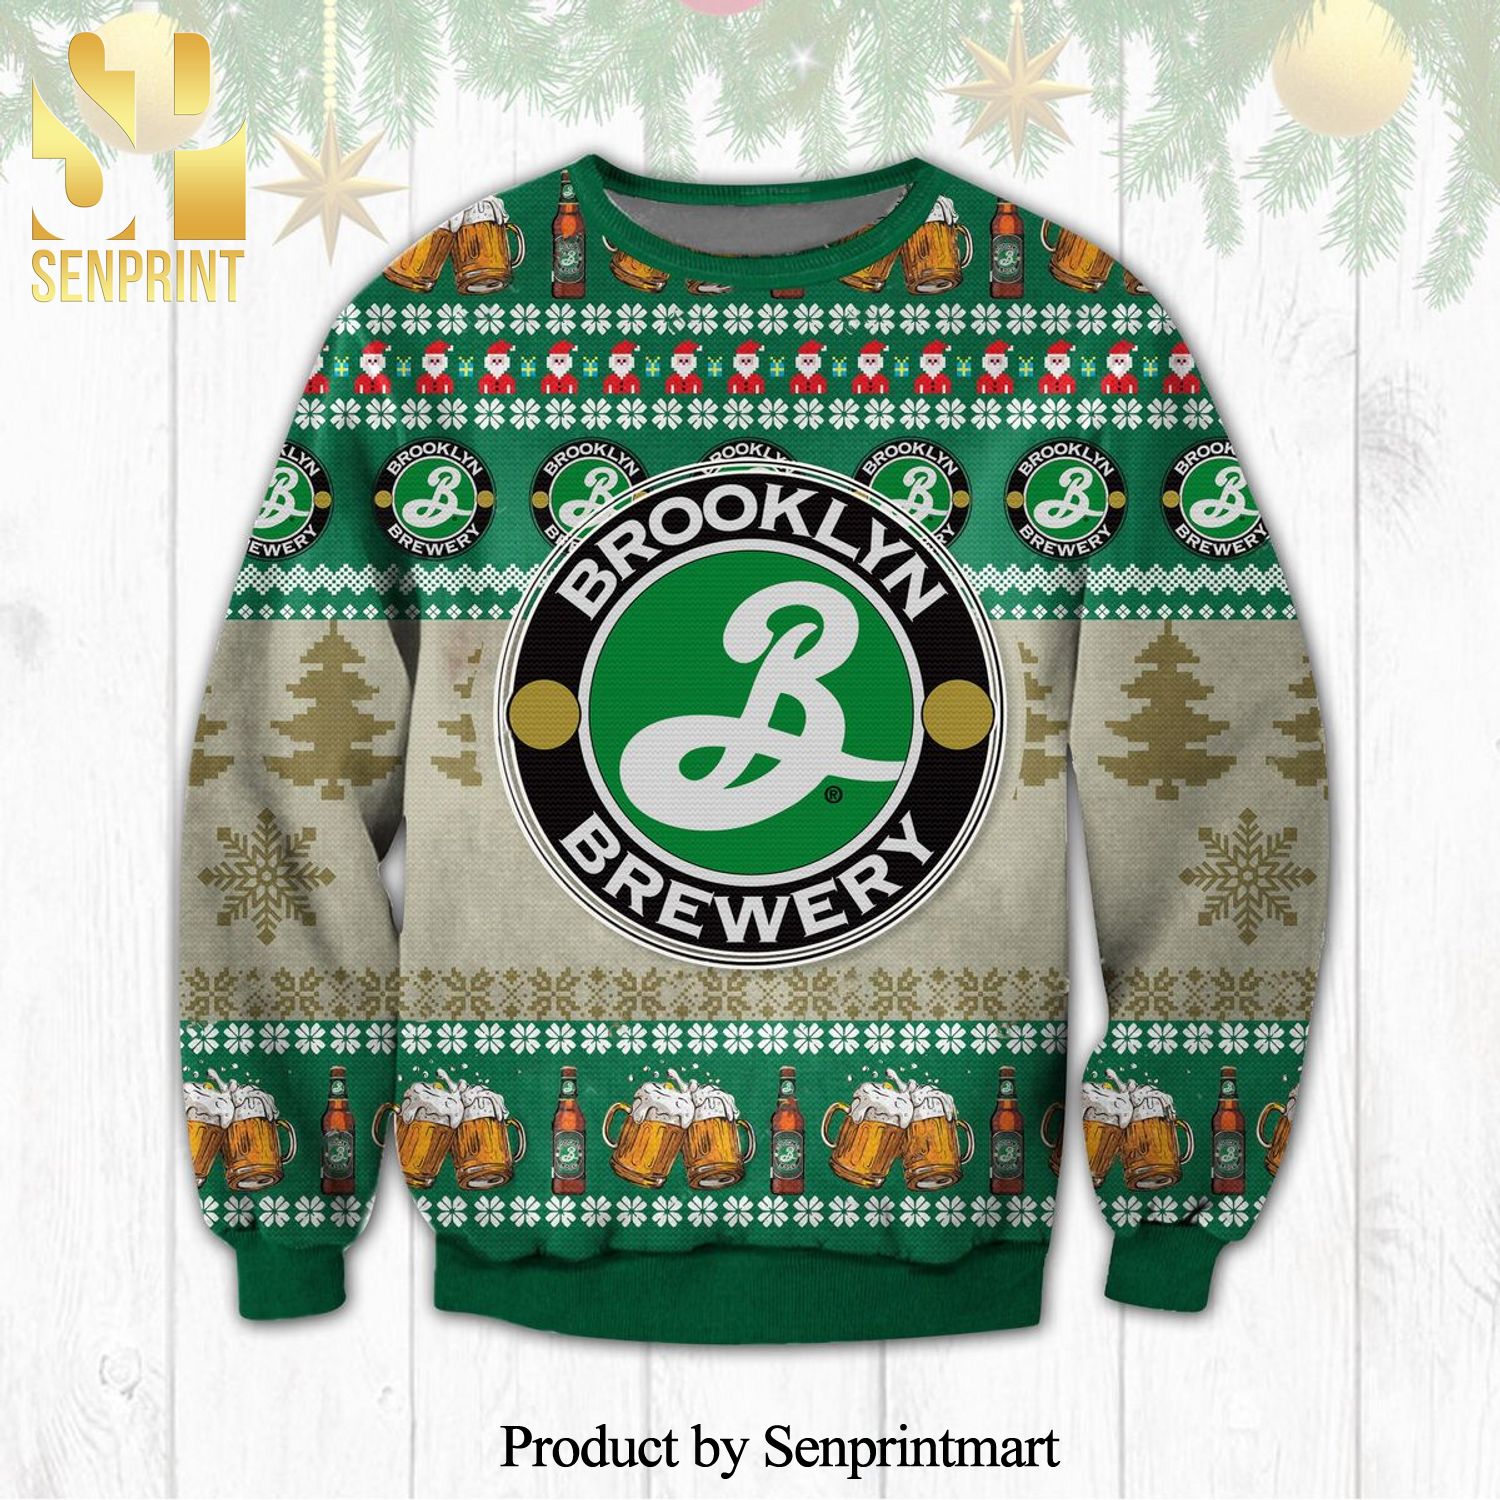 Brooklyn Brewery Logo Knitted Ugly Christmas Sweater